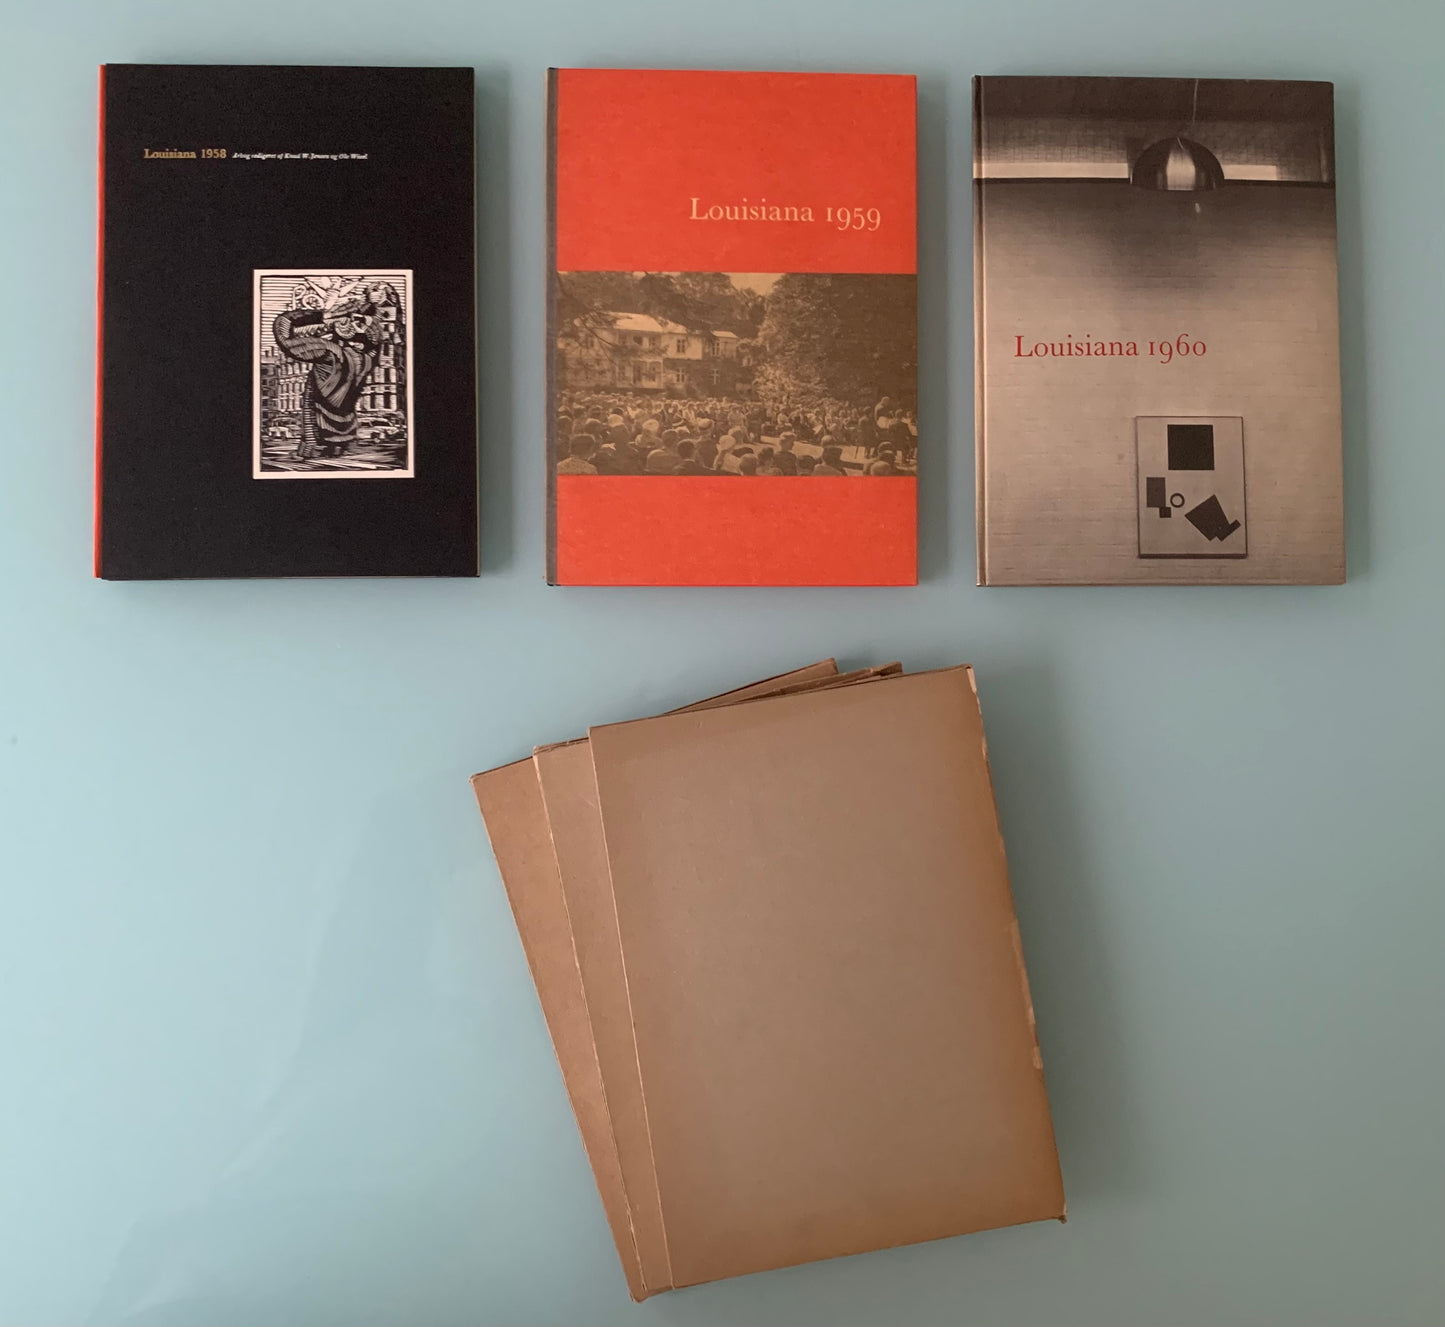 A collection of six books about Louisiana Museum of Art